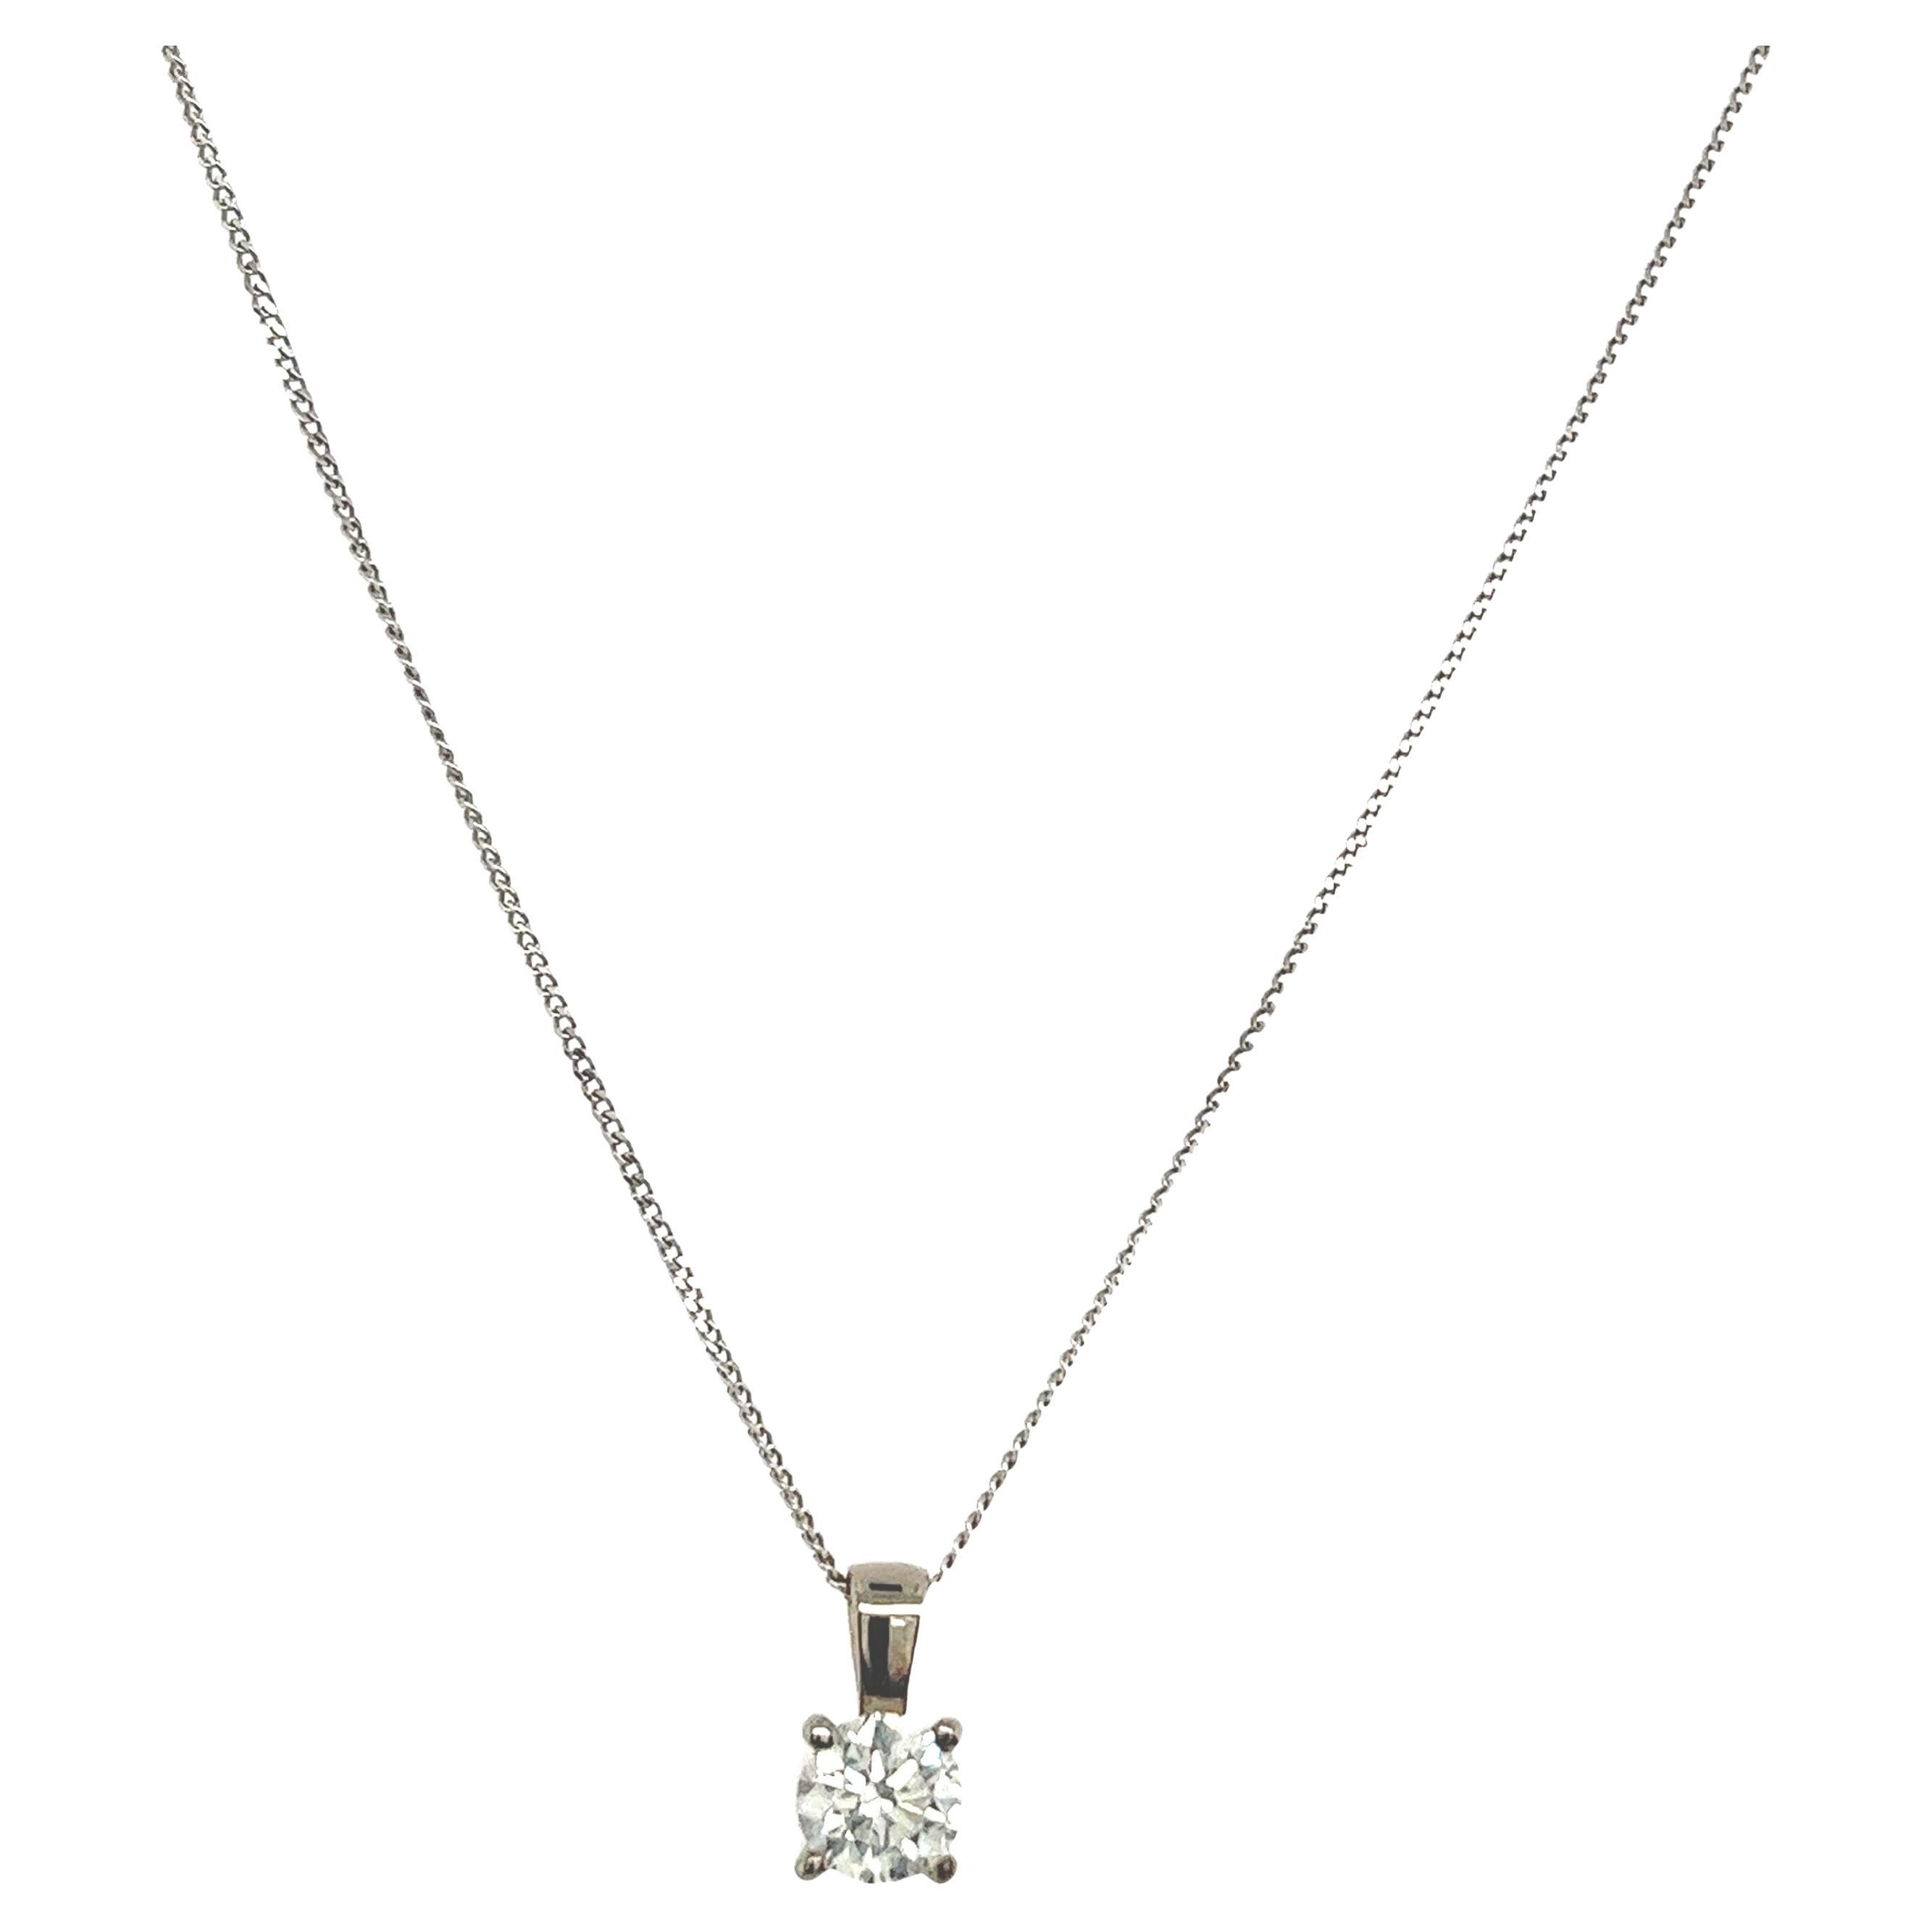 18ct White Gold Diamond Pendant, Suspended from 18" Chain For Sale